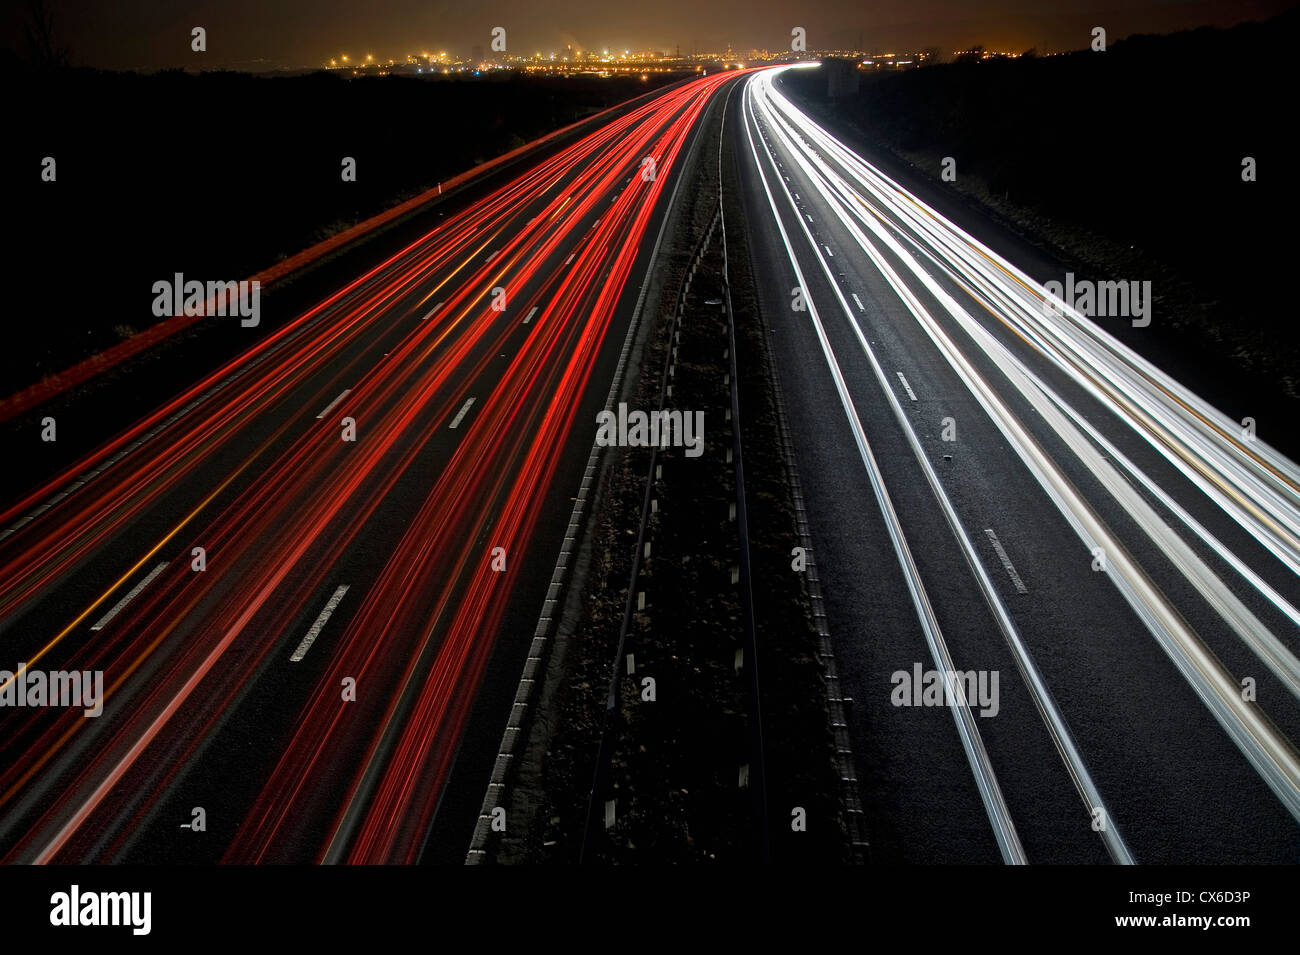 Light Trails on the M4 Motorway neat Port Talbot in South Wales with Port Talbot Steel Works lighting up the distance. Stock Photo